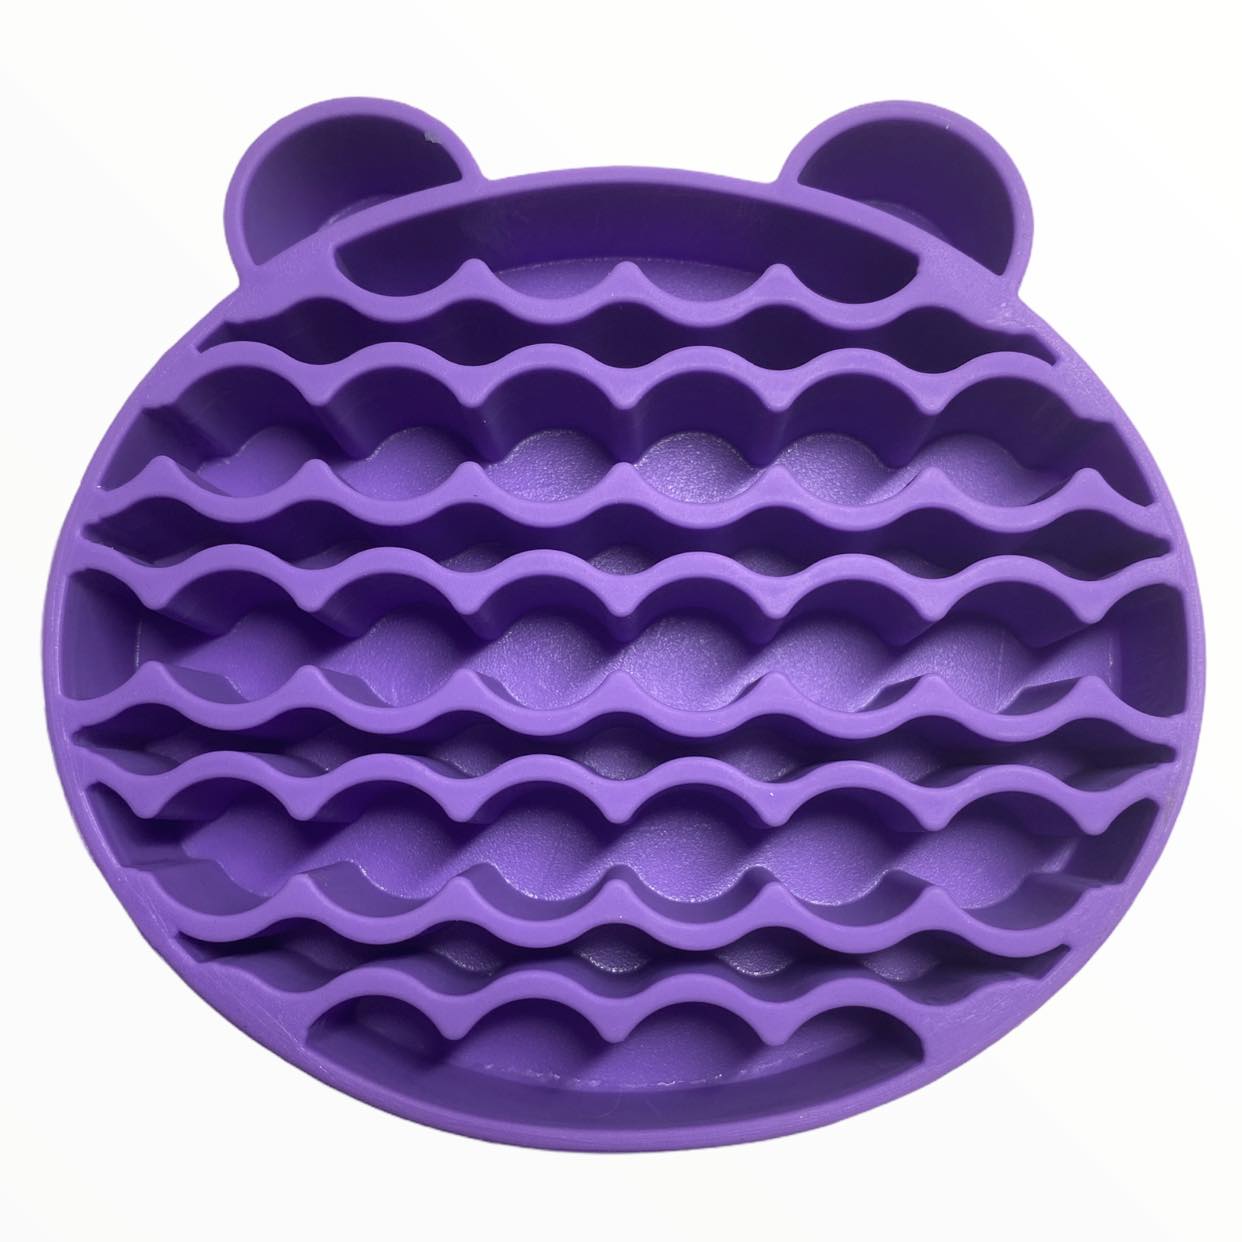 Silicone Make Up Brush Cleaner and Holder